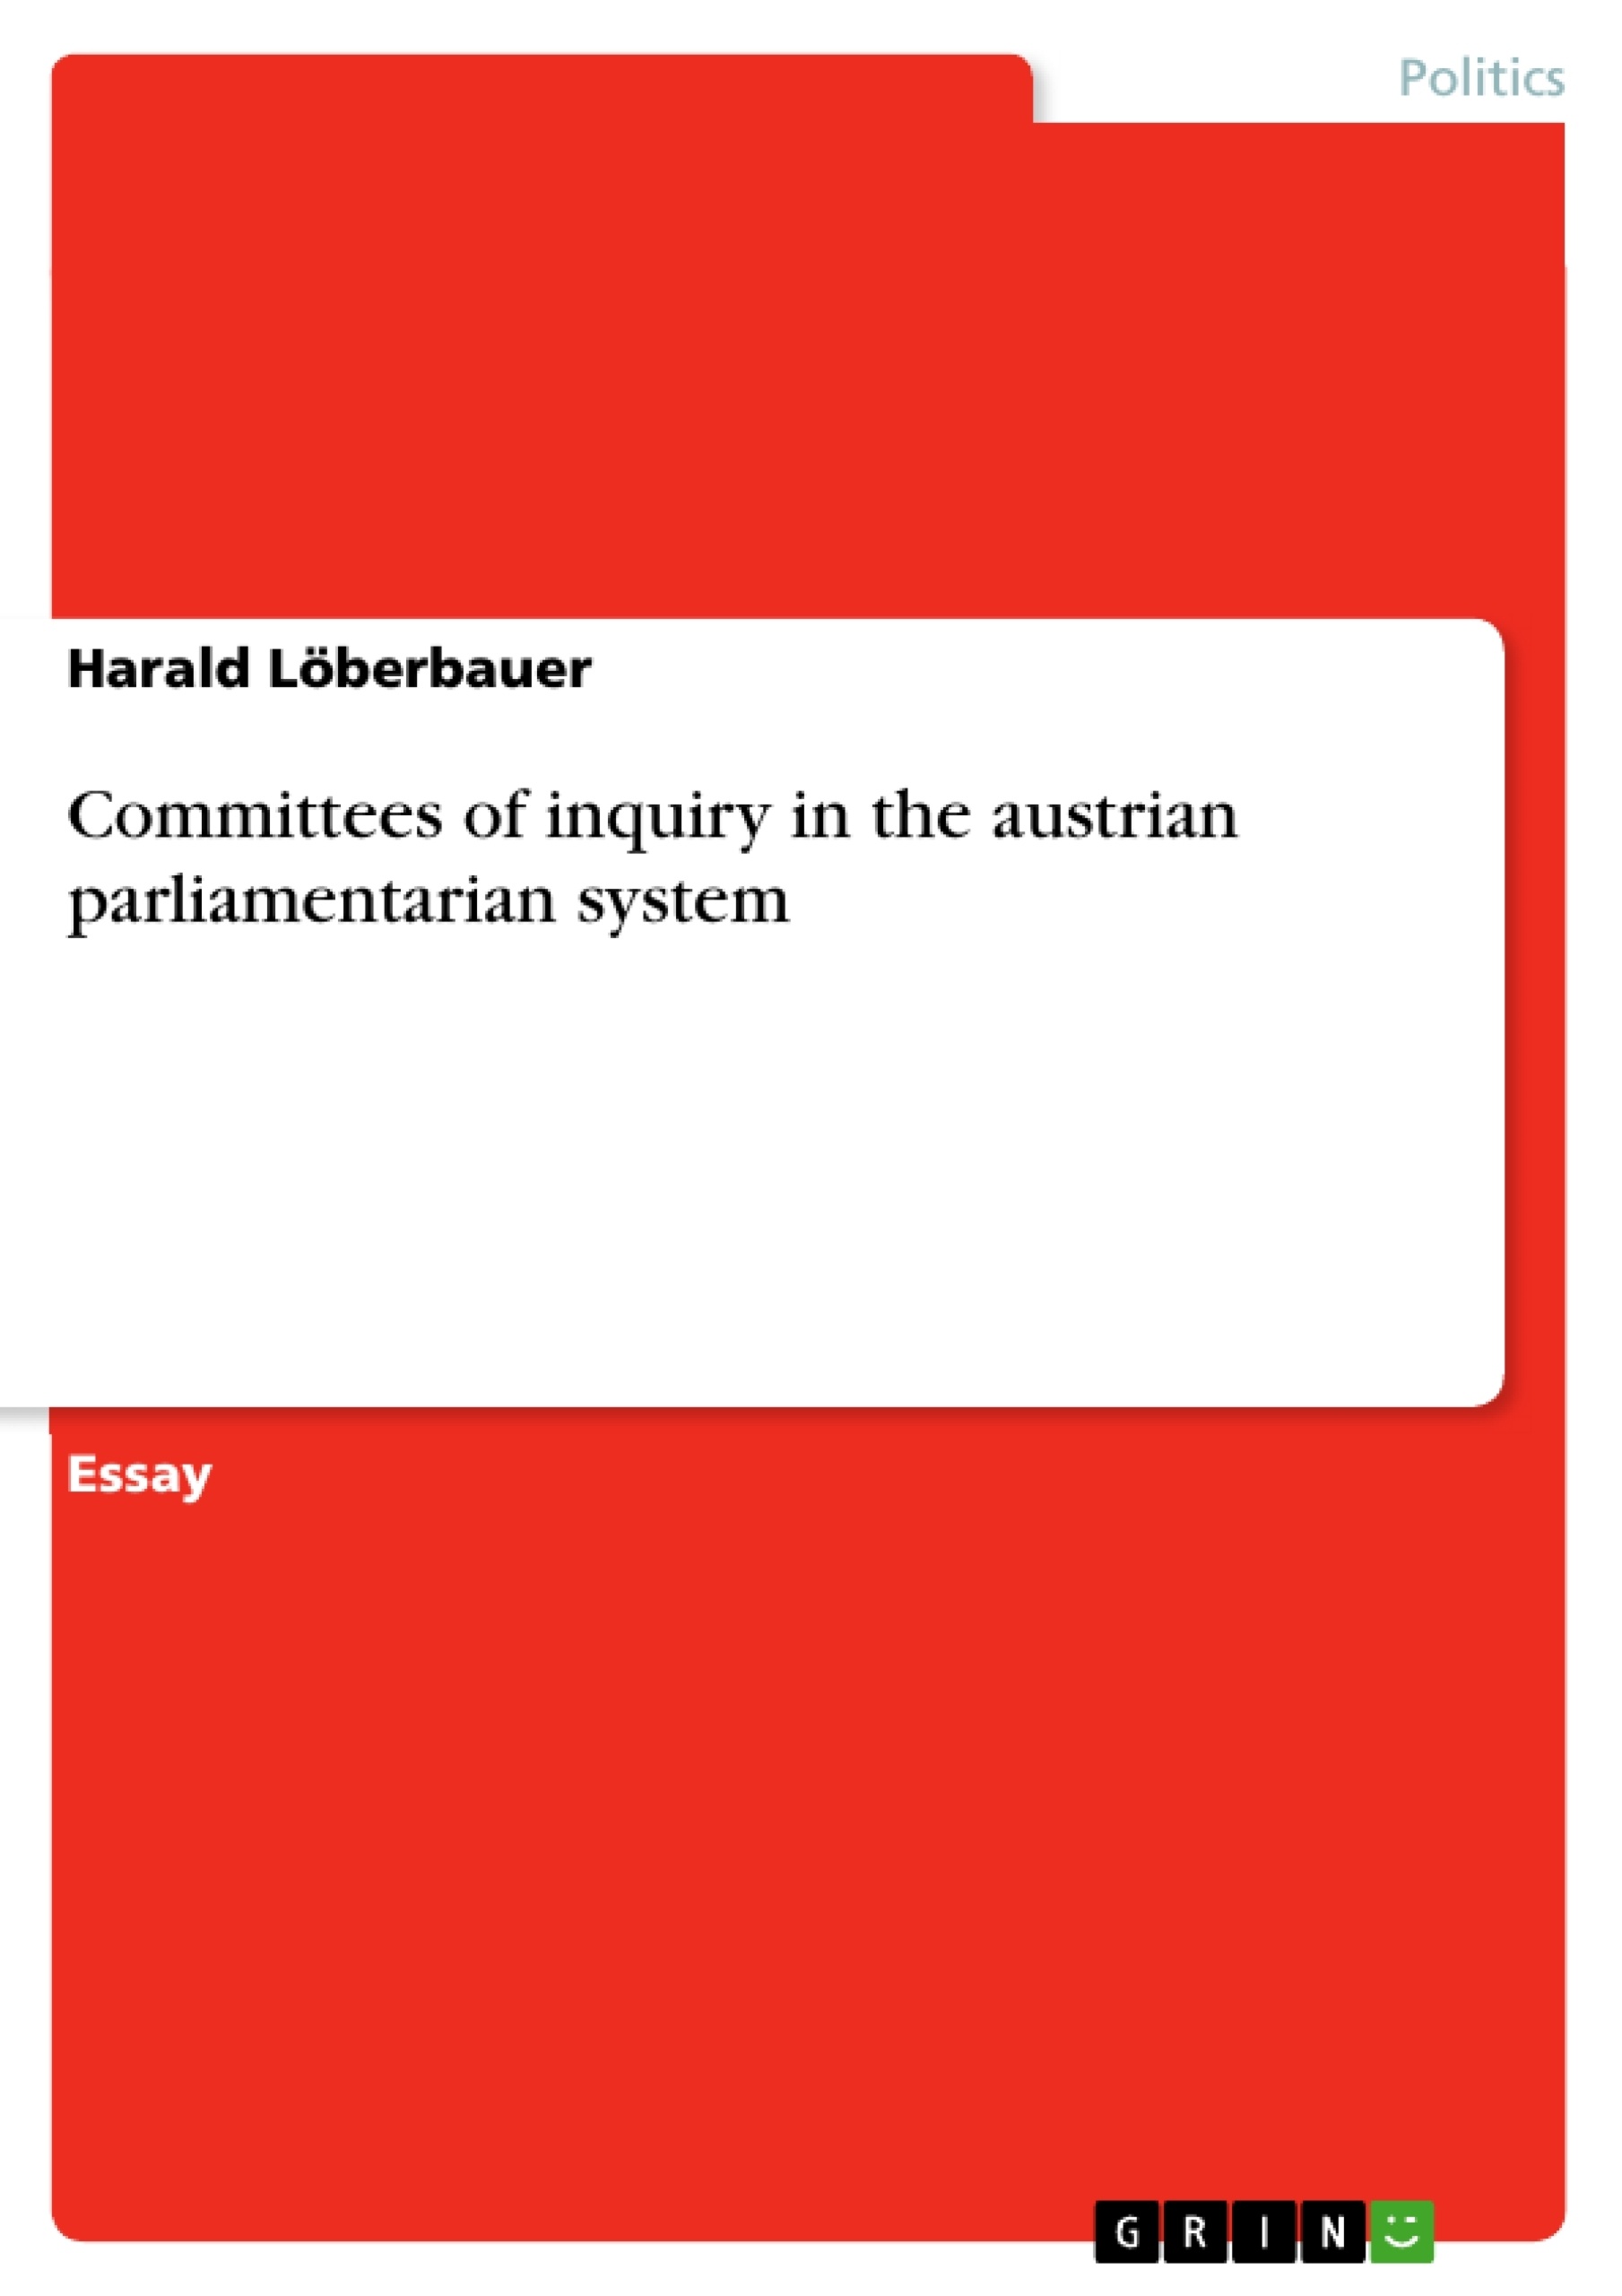 Titel: Committees of inquiry in the austrian parliamentarian system